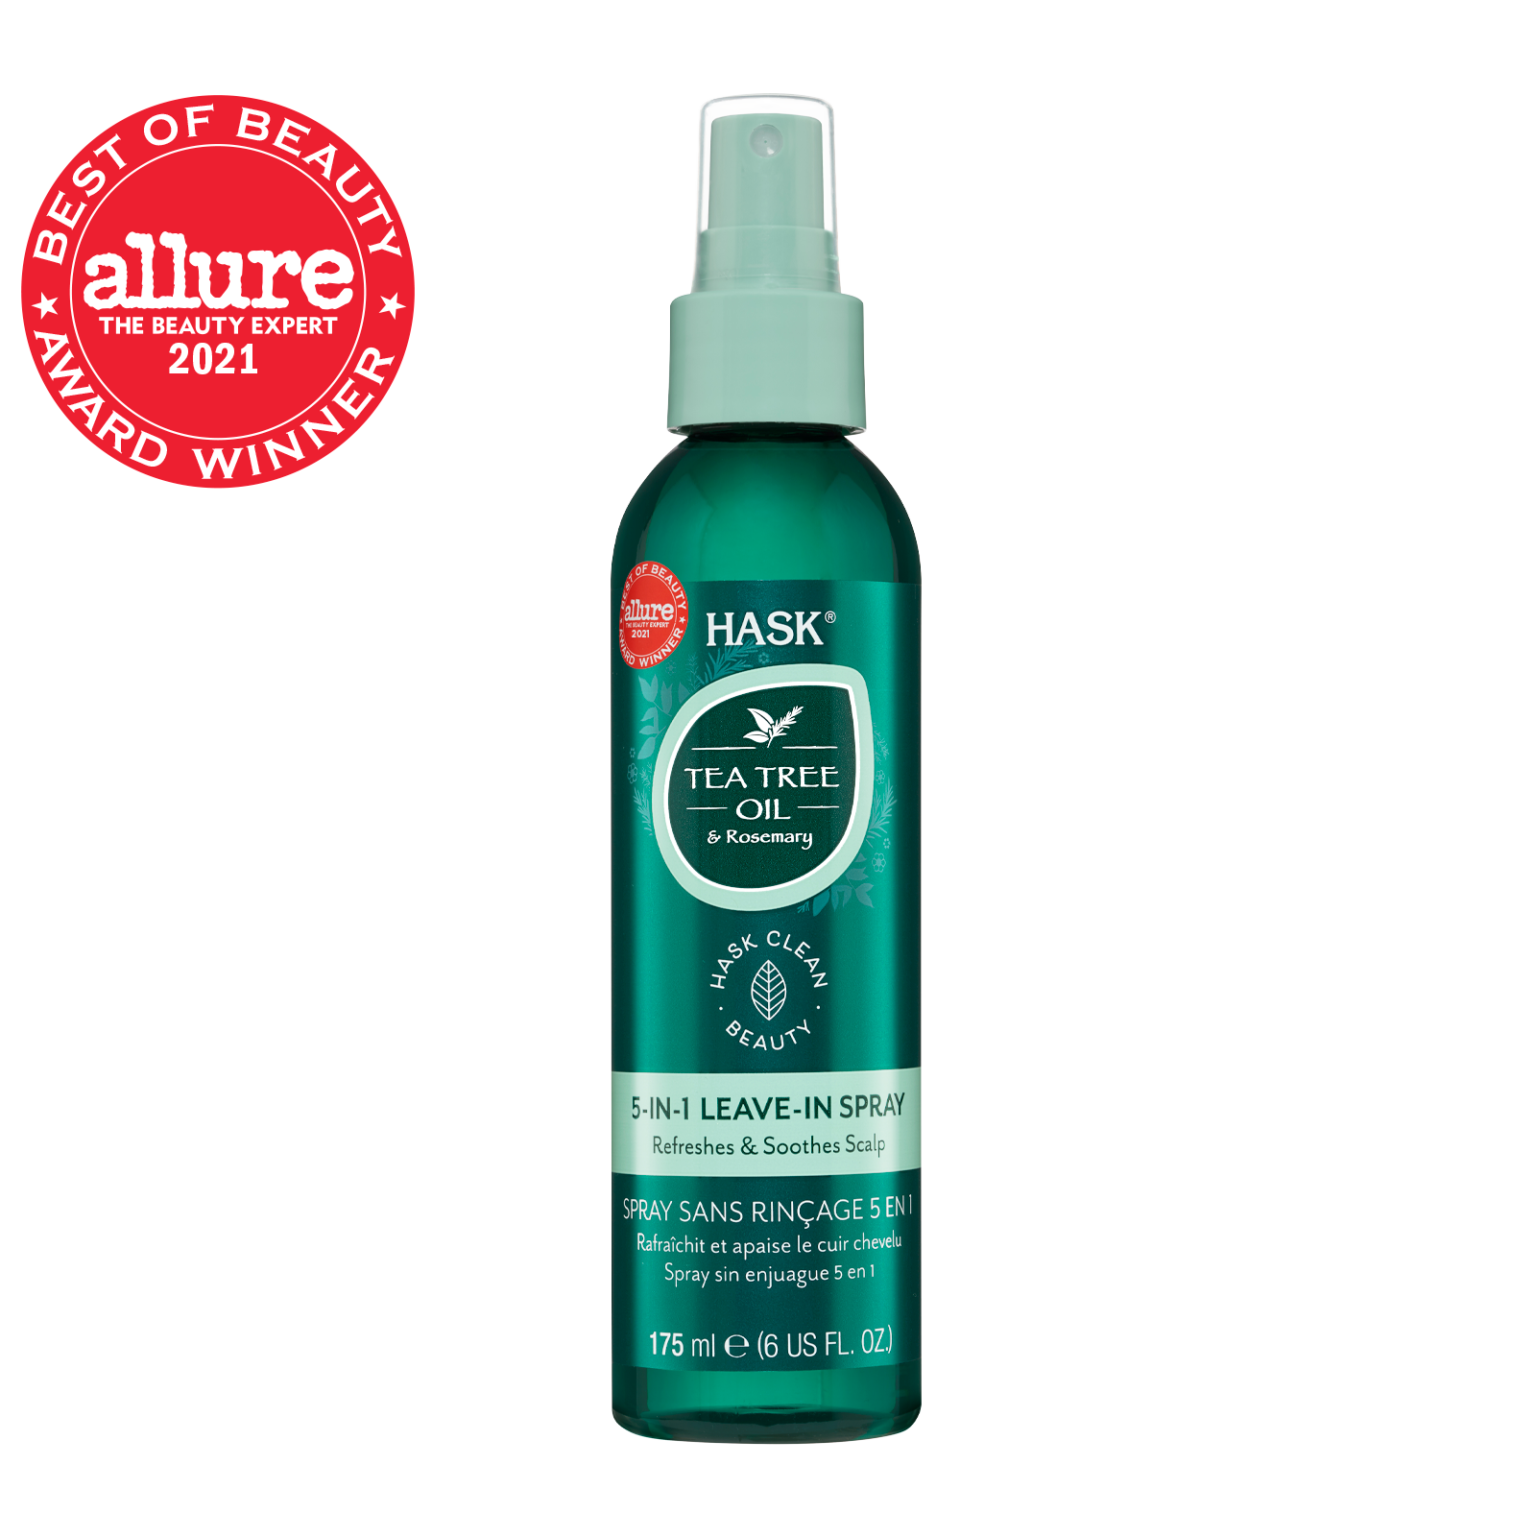 Hask_TeaTree_5in1Spray_1600x1600_allure-3-1536x1536